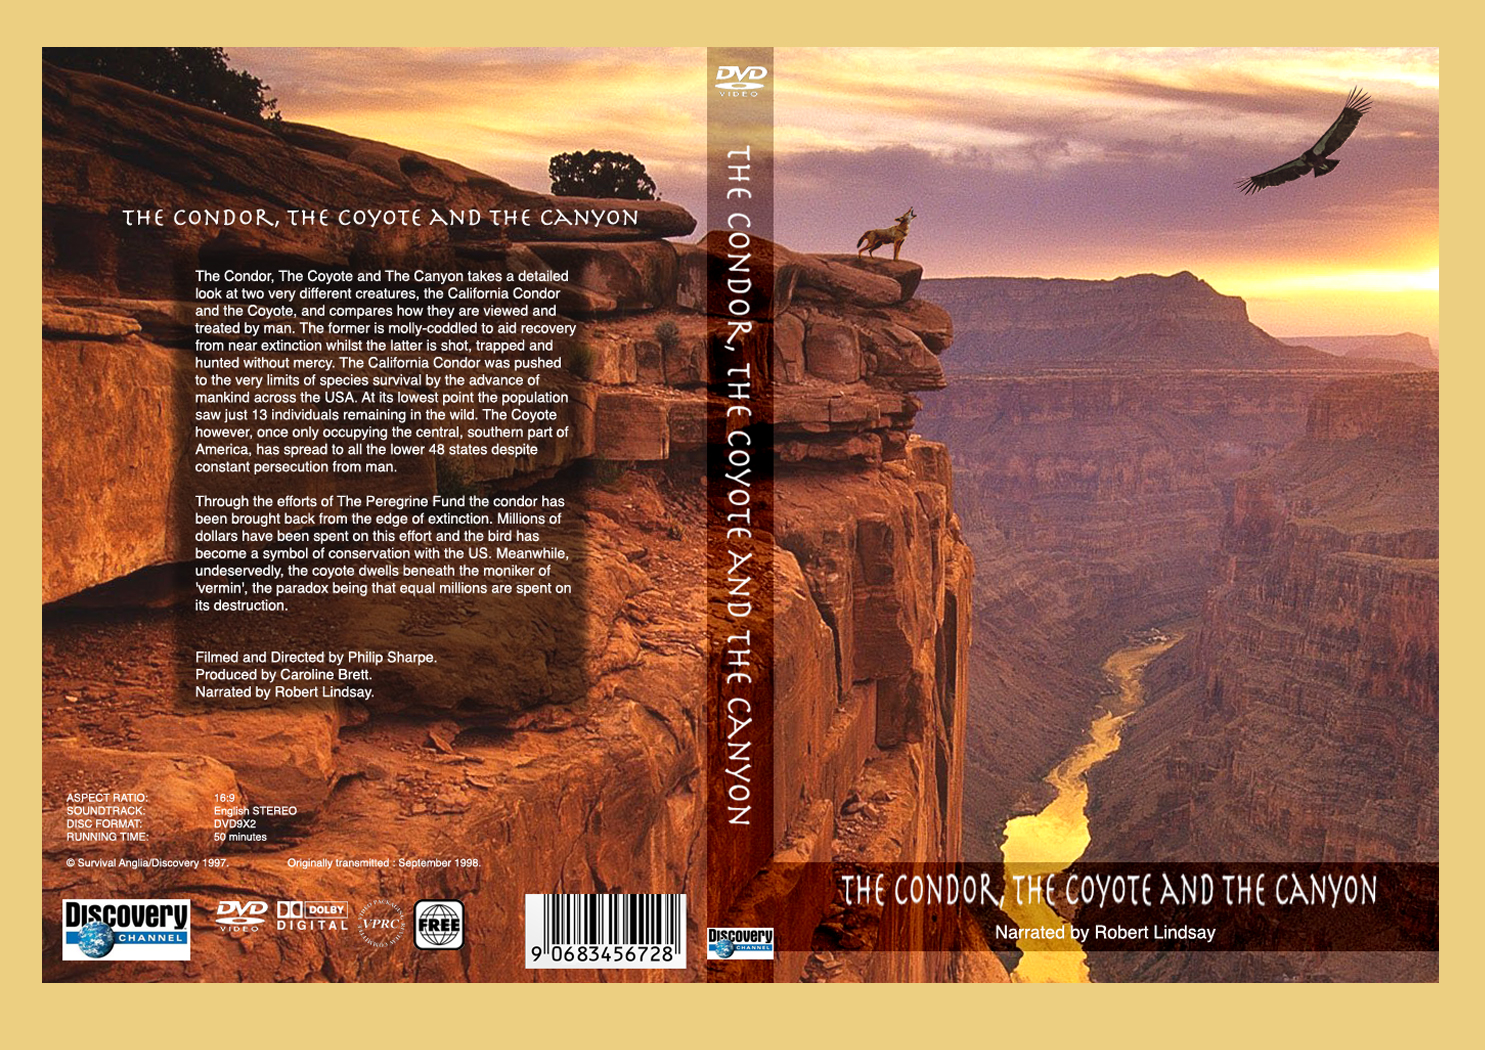 'The Condor, The Coyote and The Canyon', DVD cover.